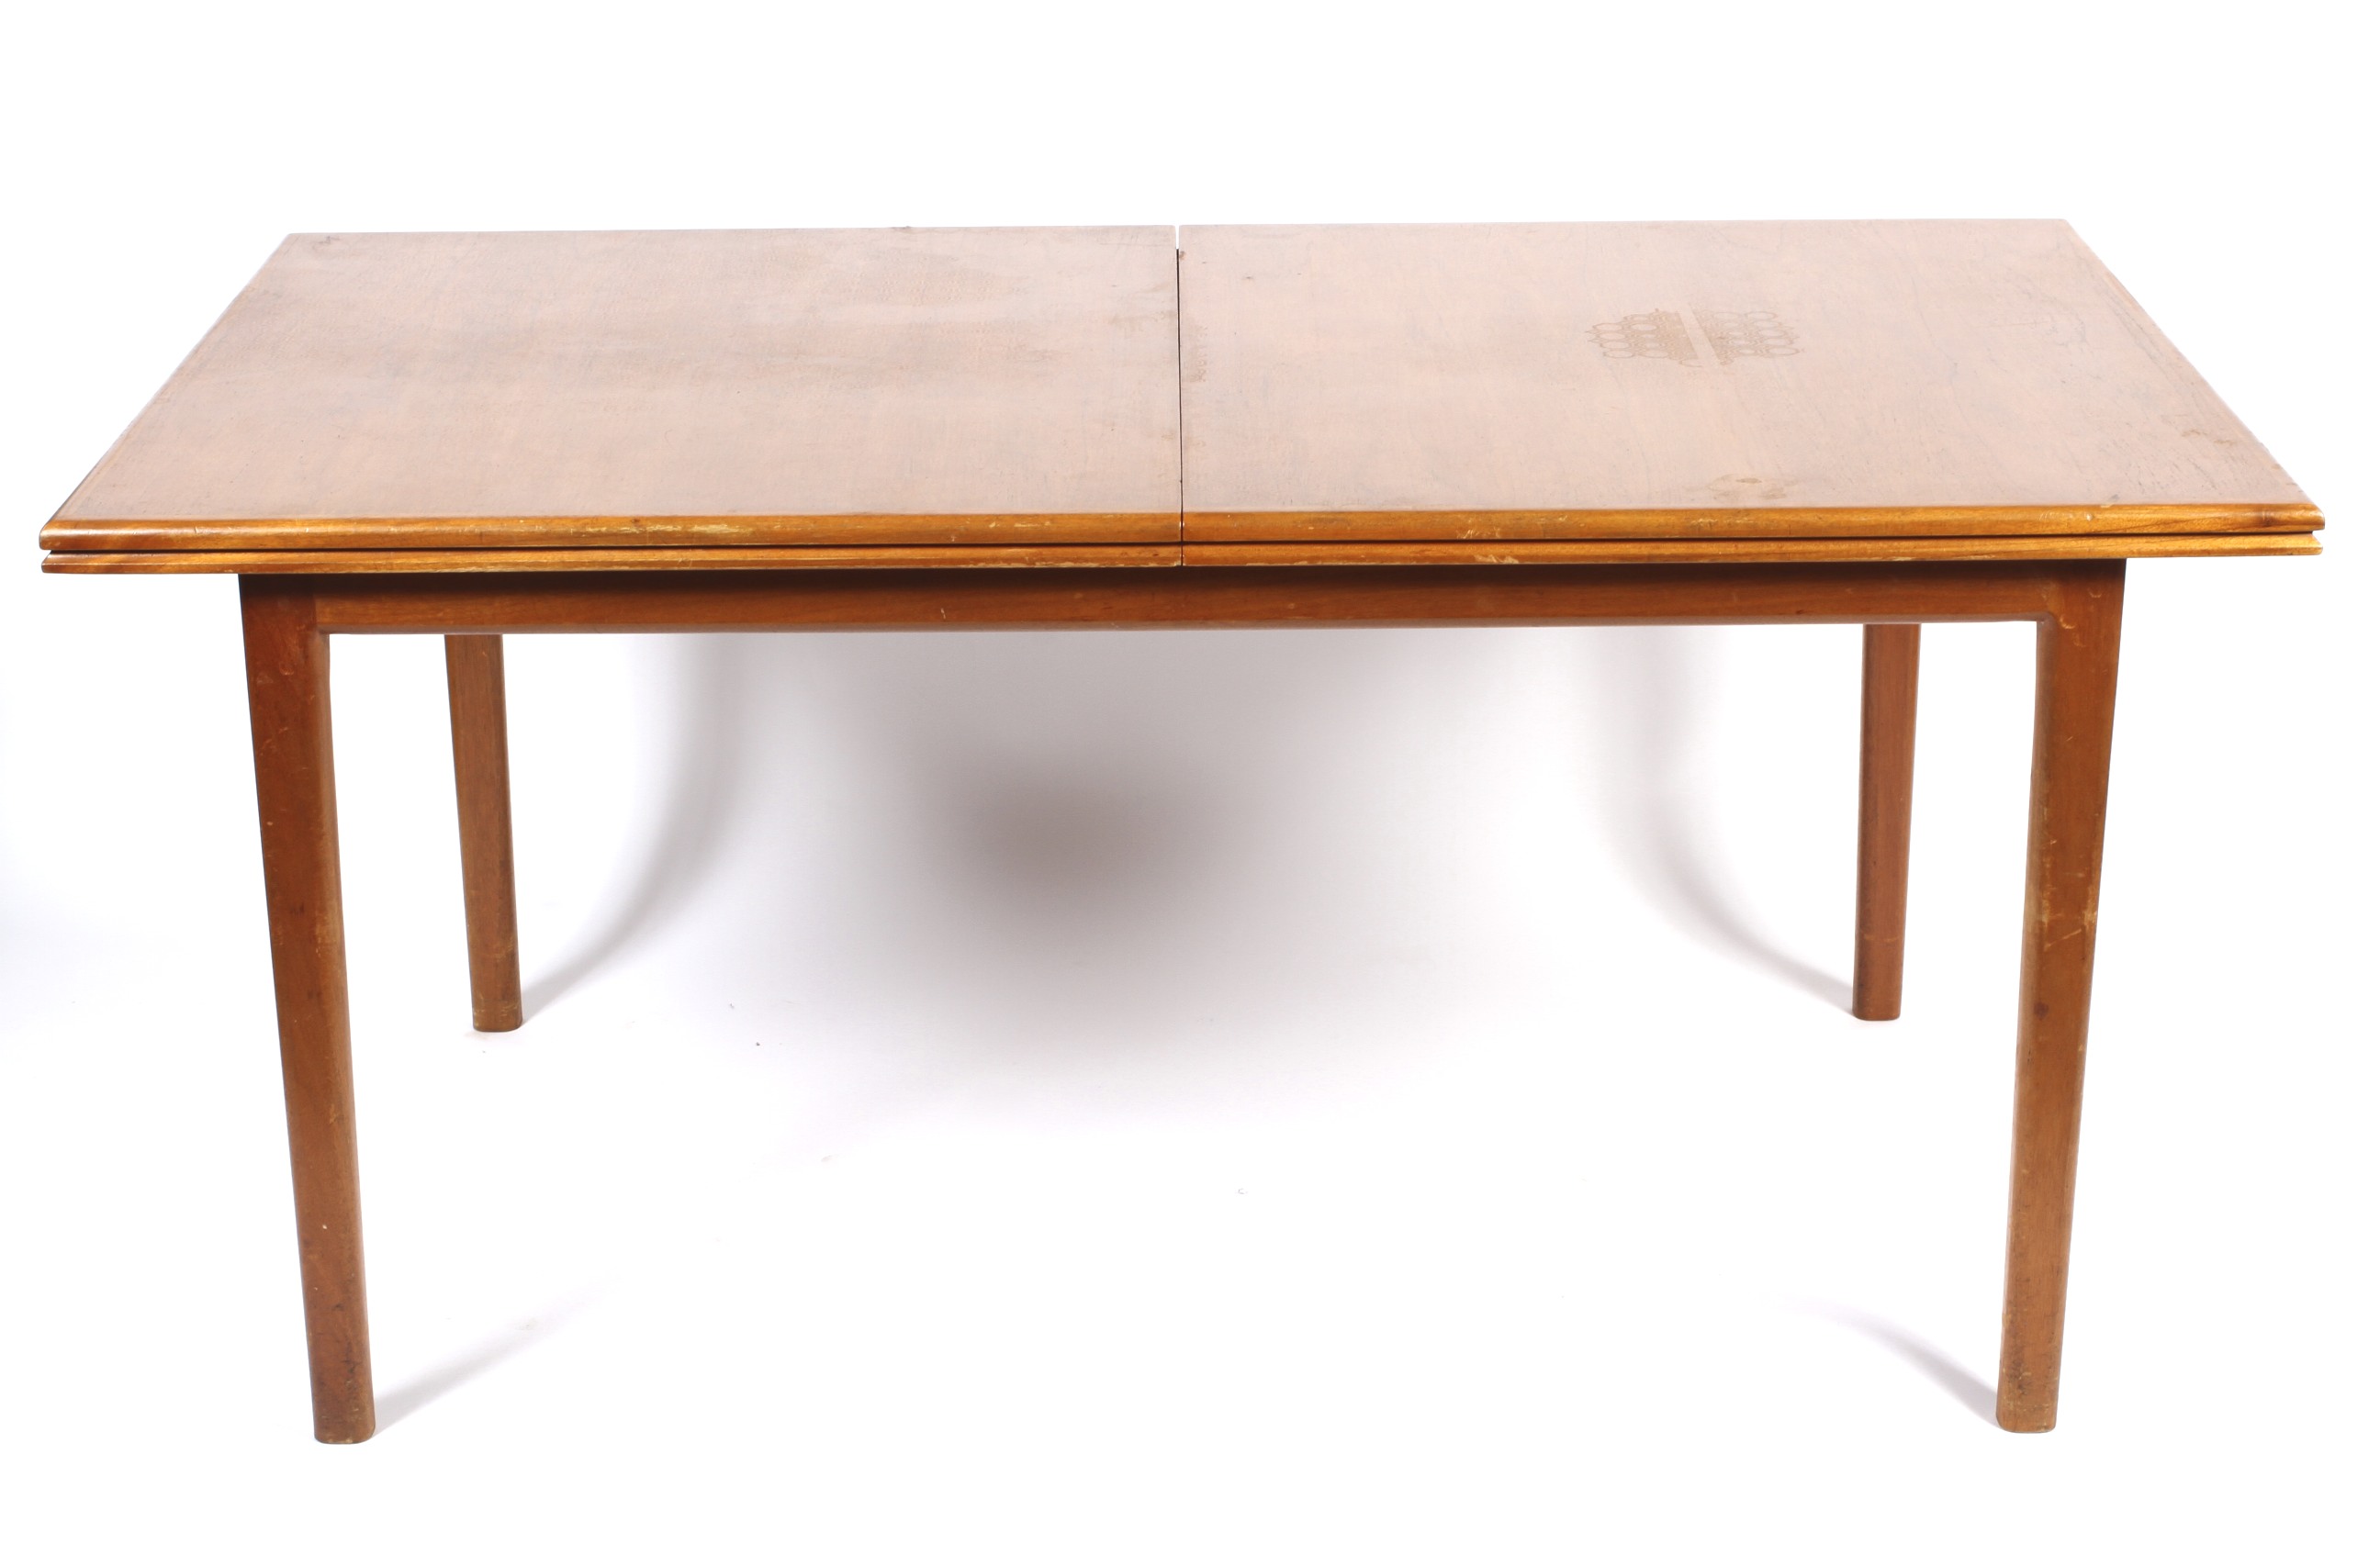 A teak extending dining table and chairs. - Image 2 of 4